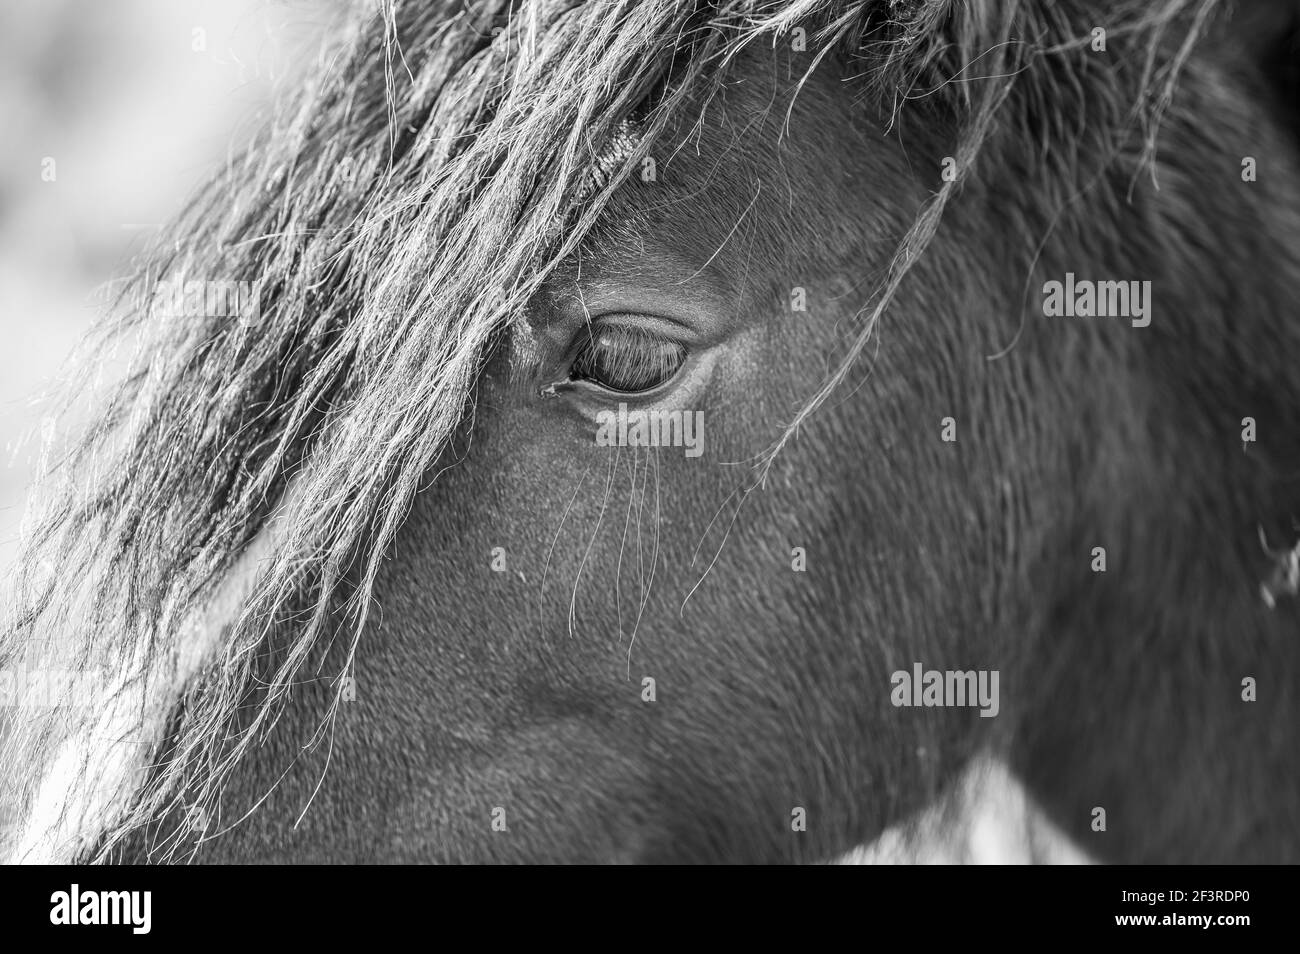 Close up of a wild horse. Focus is on the eye. Black & White Stock Photo